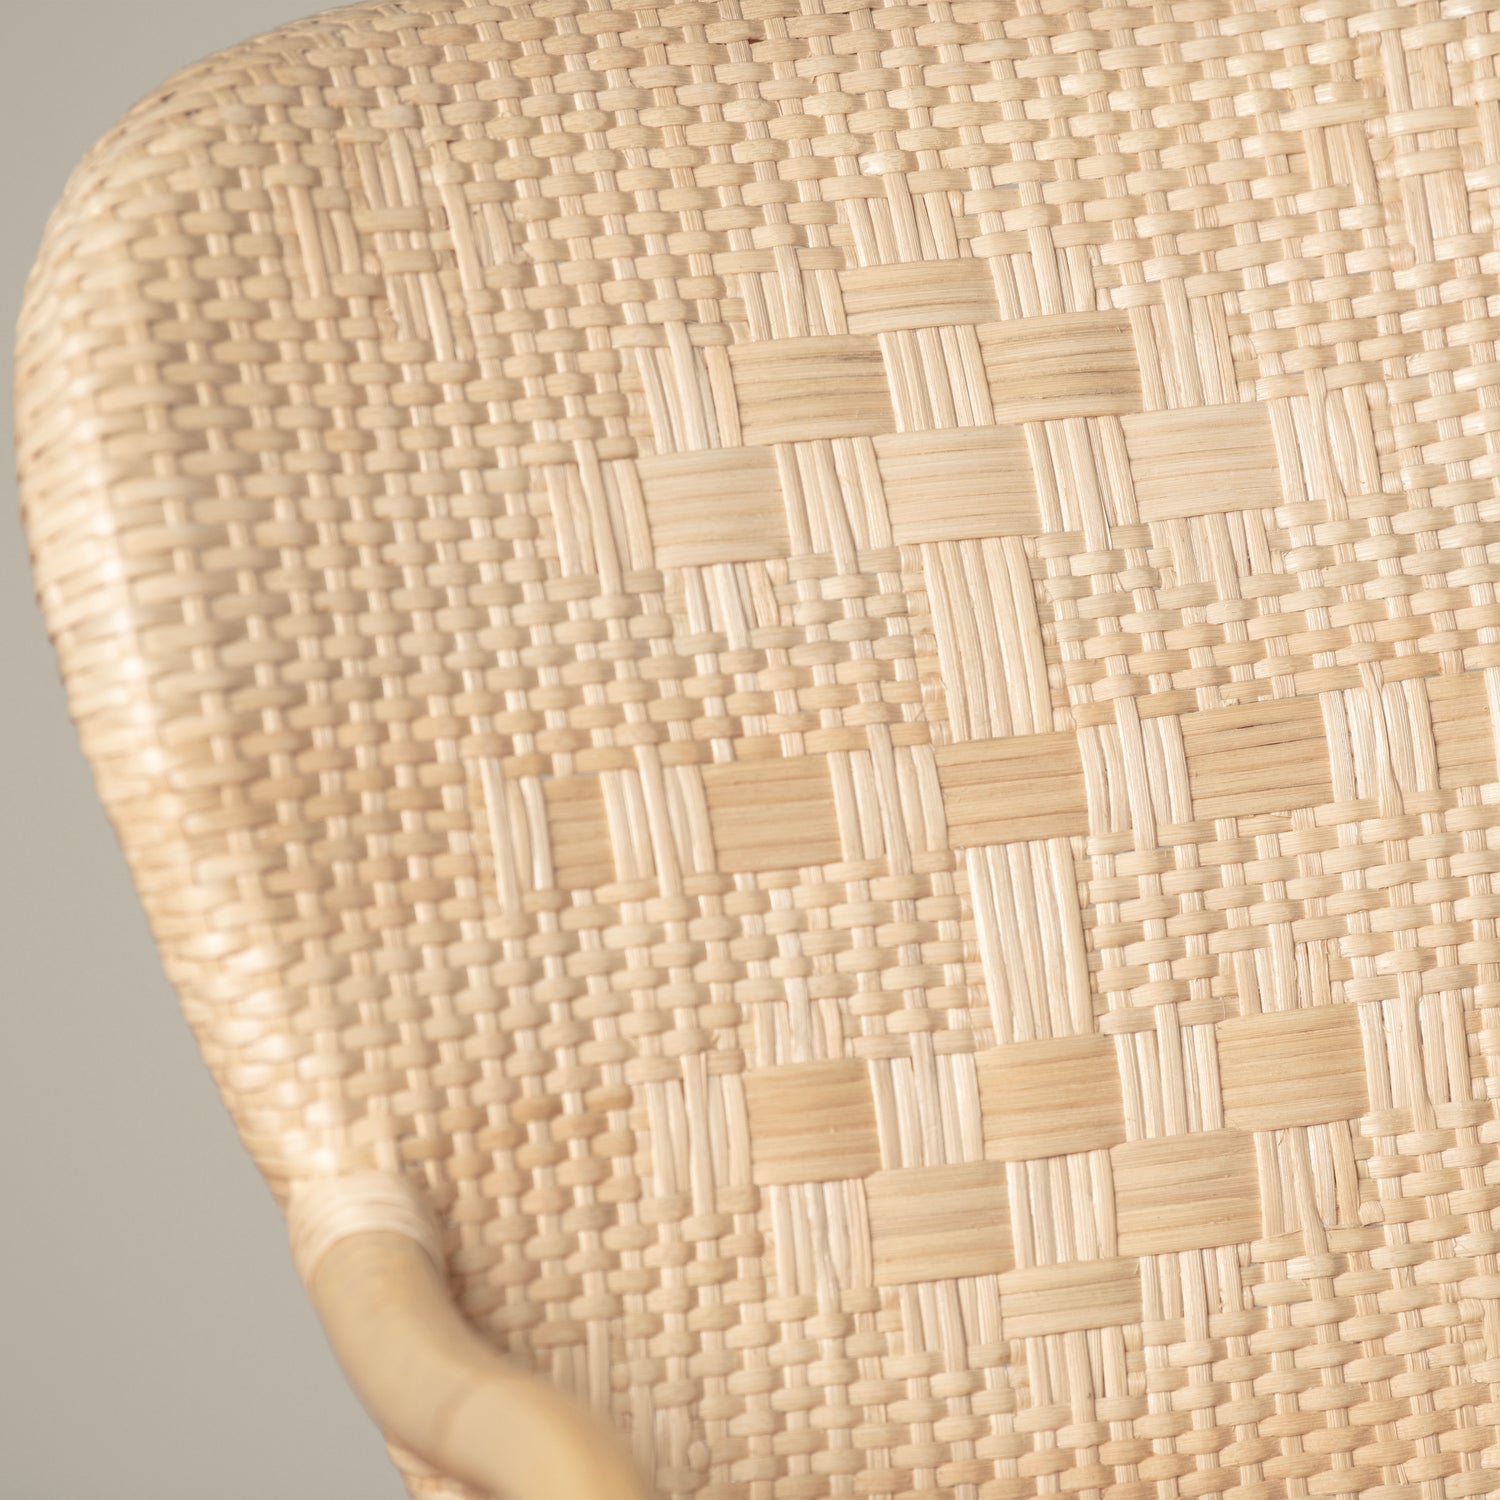 A closeup of the rattan chair and its woven cane detailing.